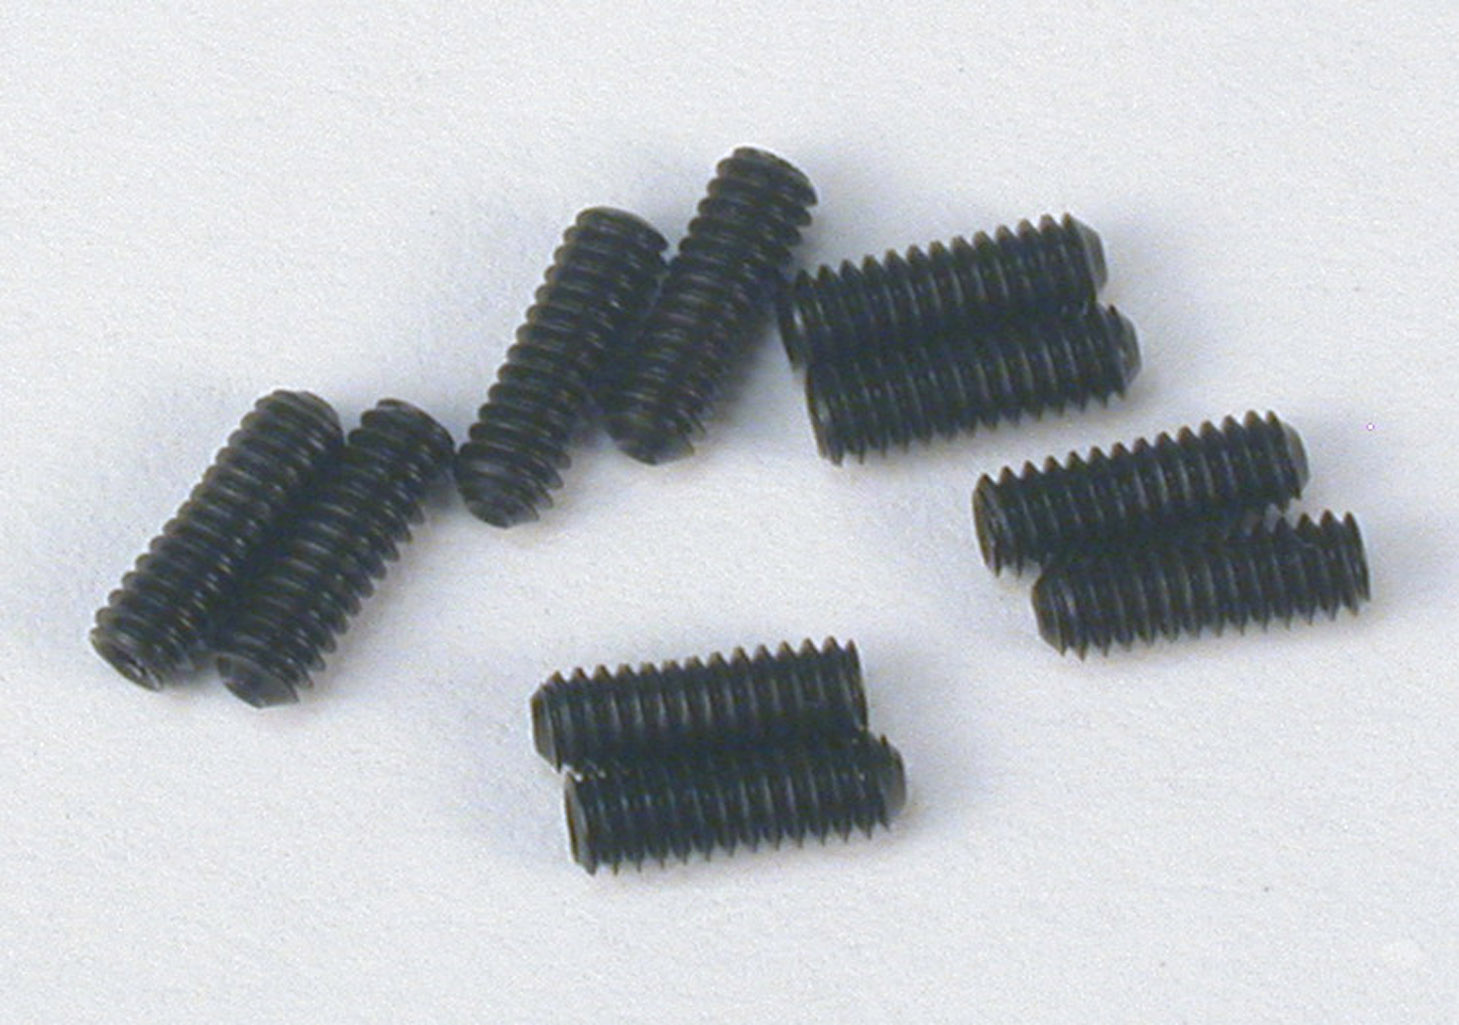 Scalextric new countersunk car body fixing screws spare parts Great replacements 